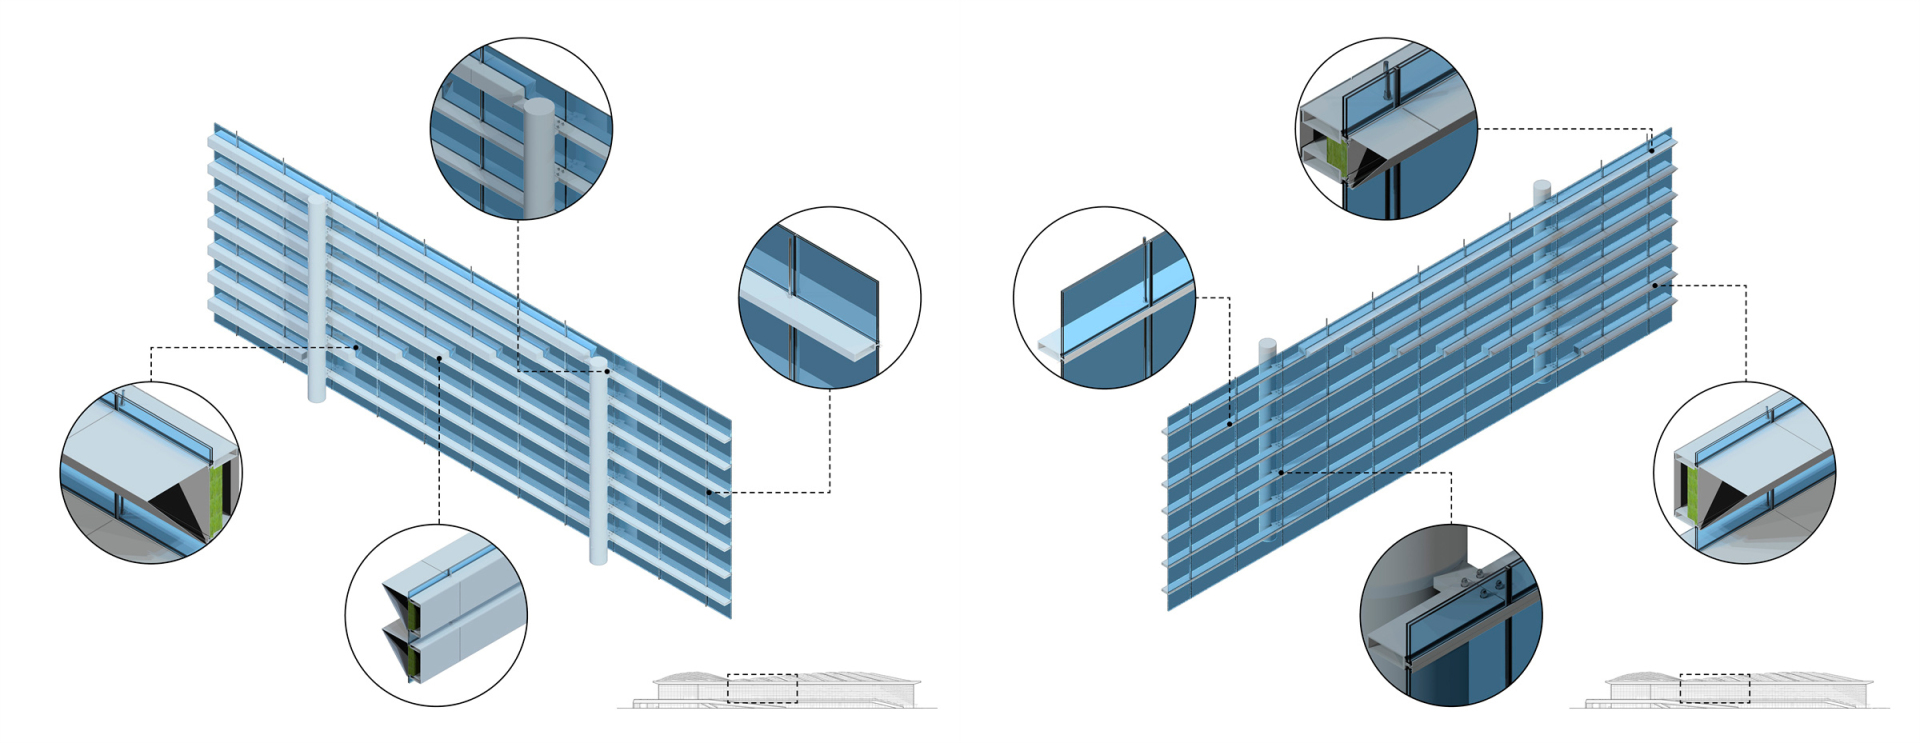 4 - daylighting performance of different facades, window-to-wall ratios, and shading designs